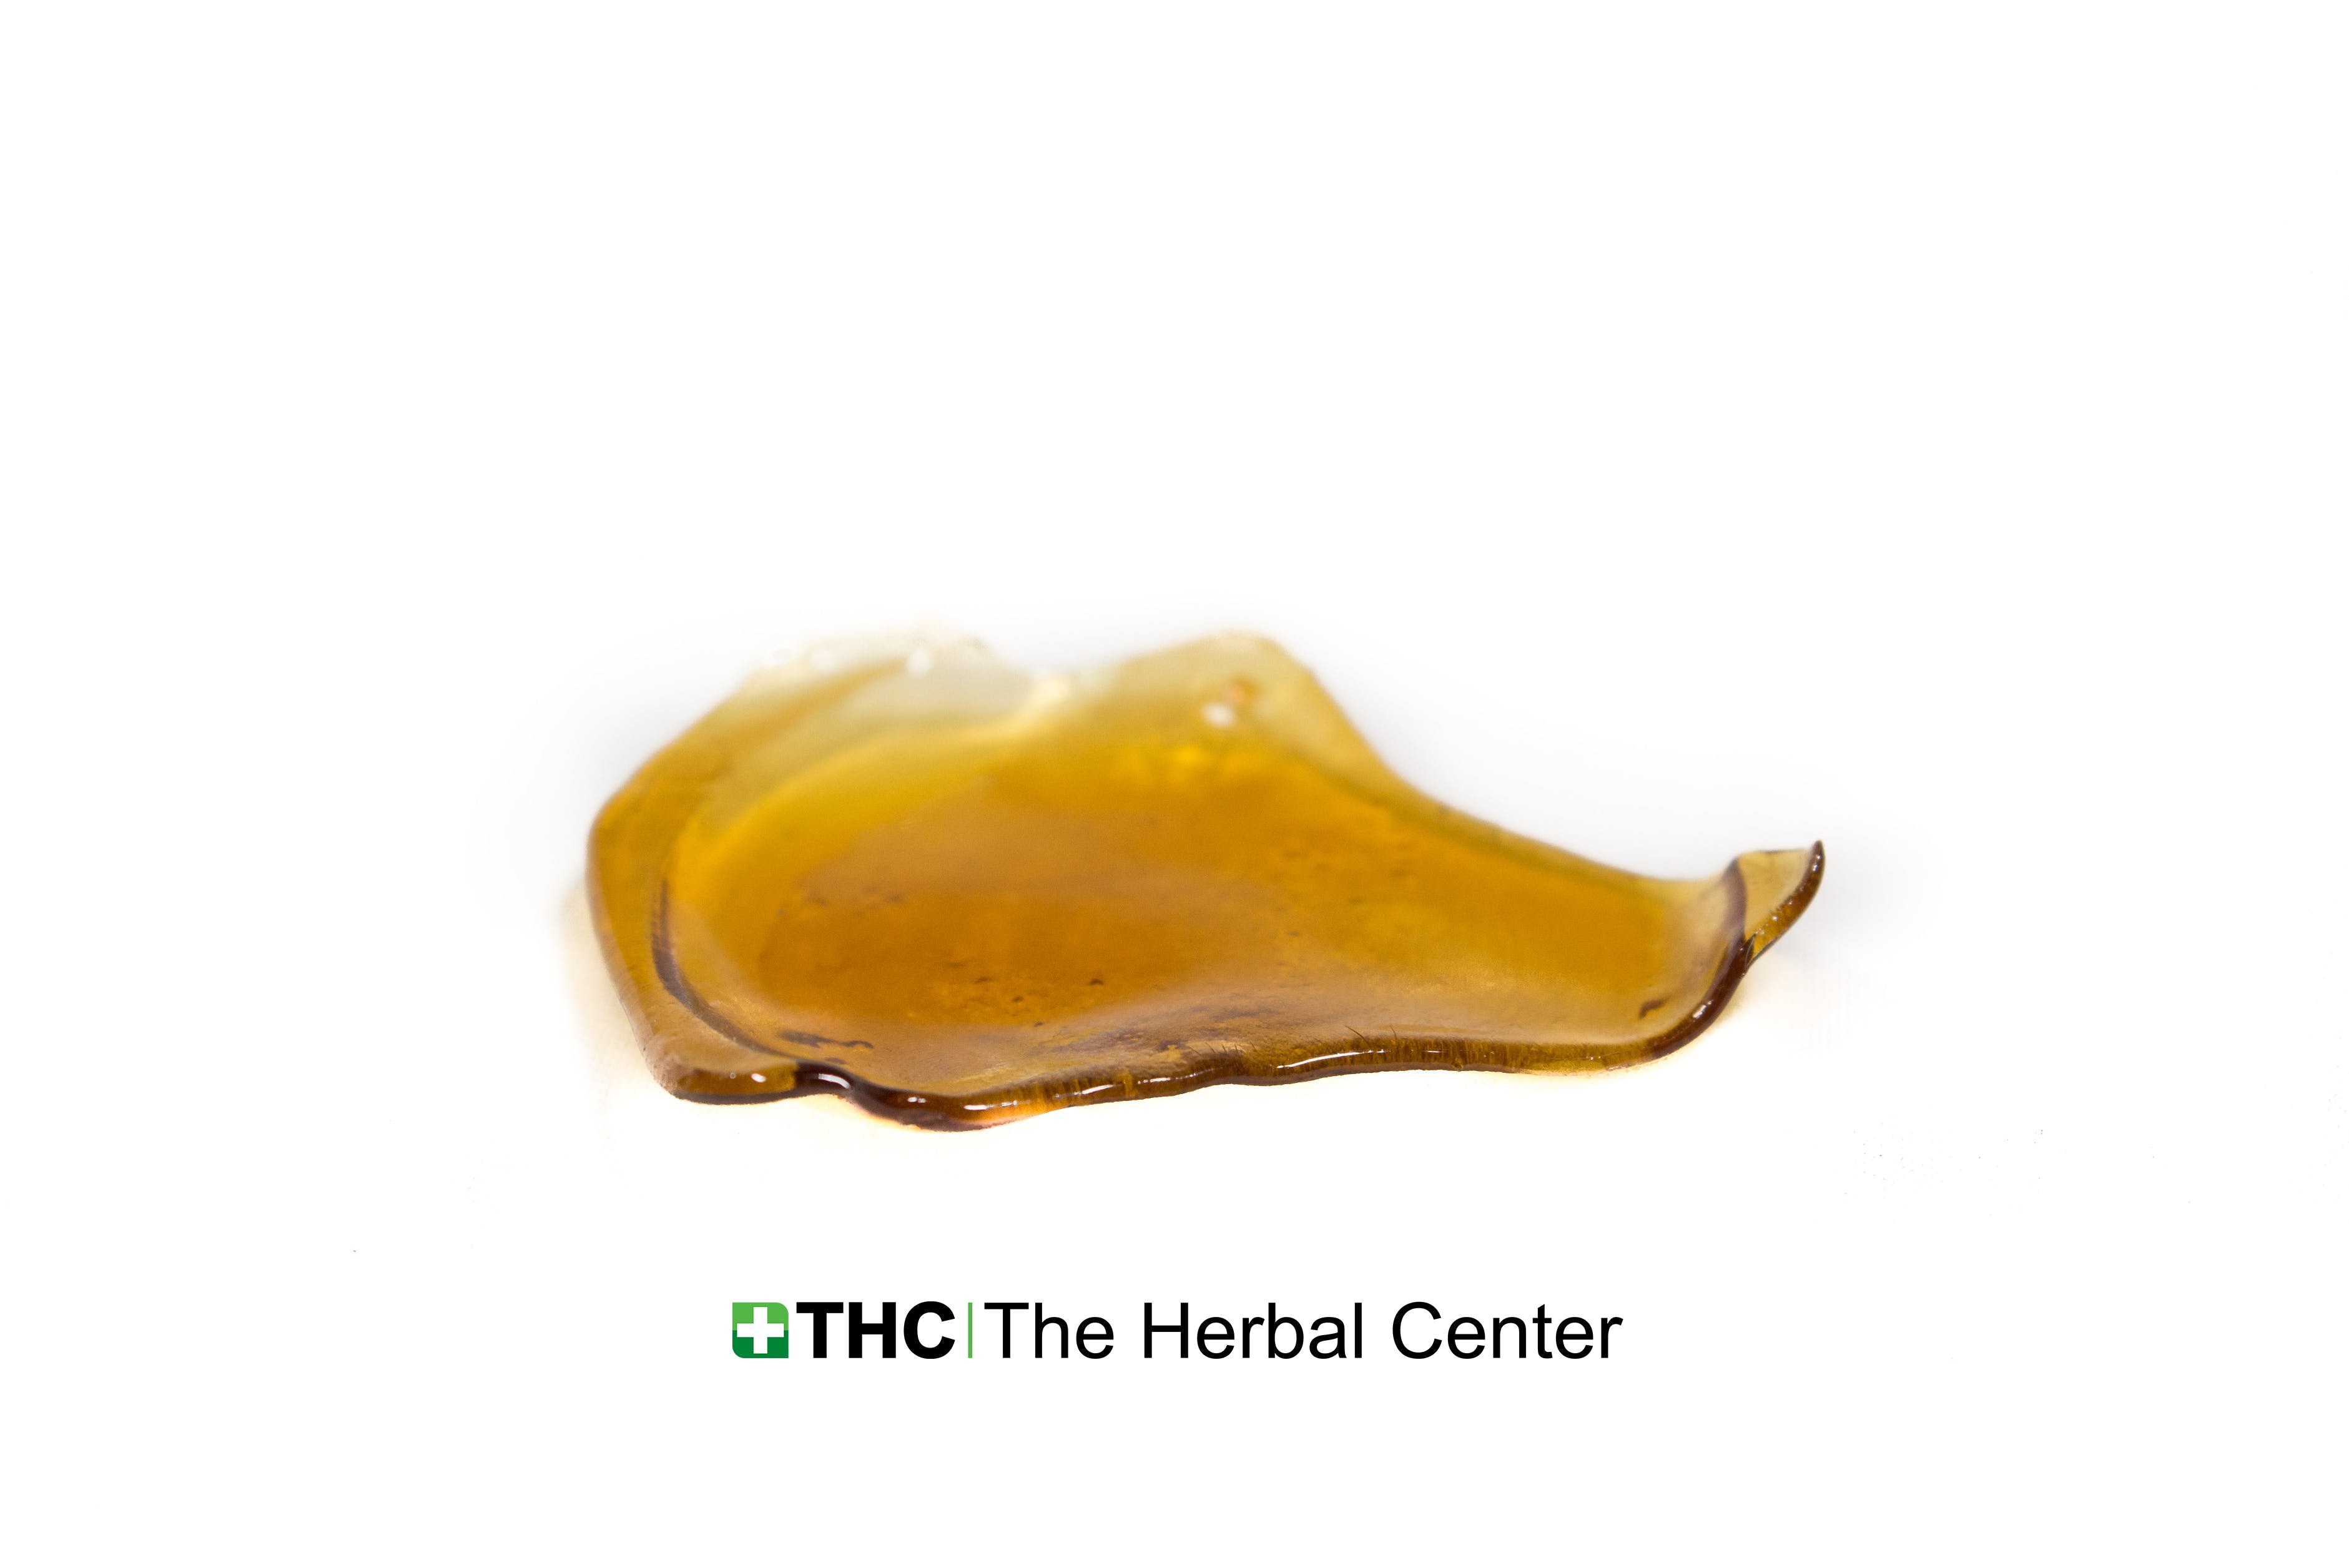 concentrate-csc-shatter-master-kush